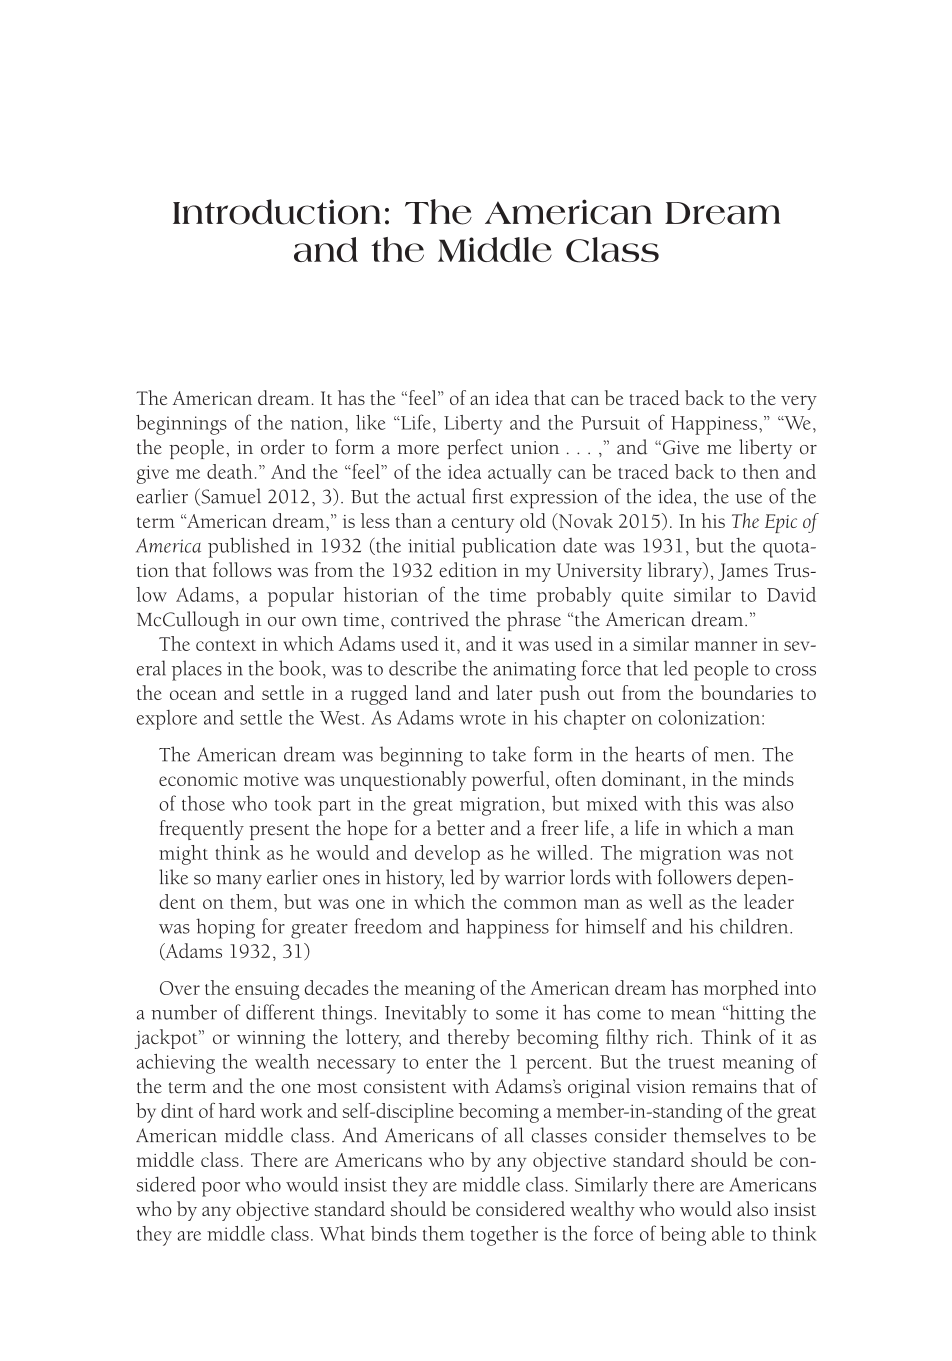 The American Middle Class: An Economic Encyclopedia of Progress and Poverty [2 volumes] page xxi